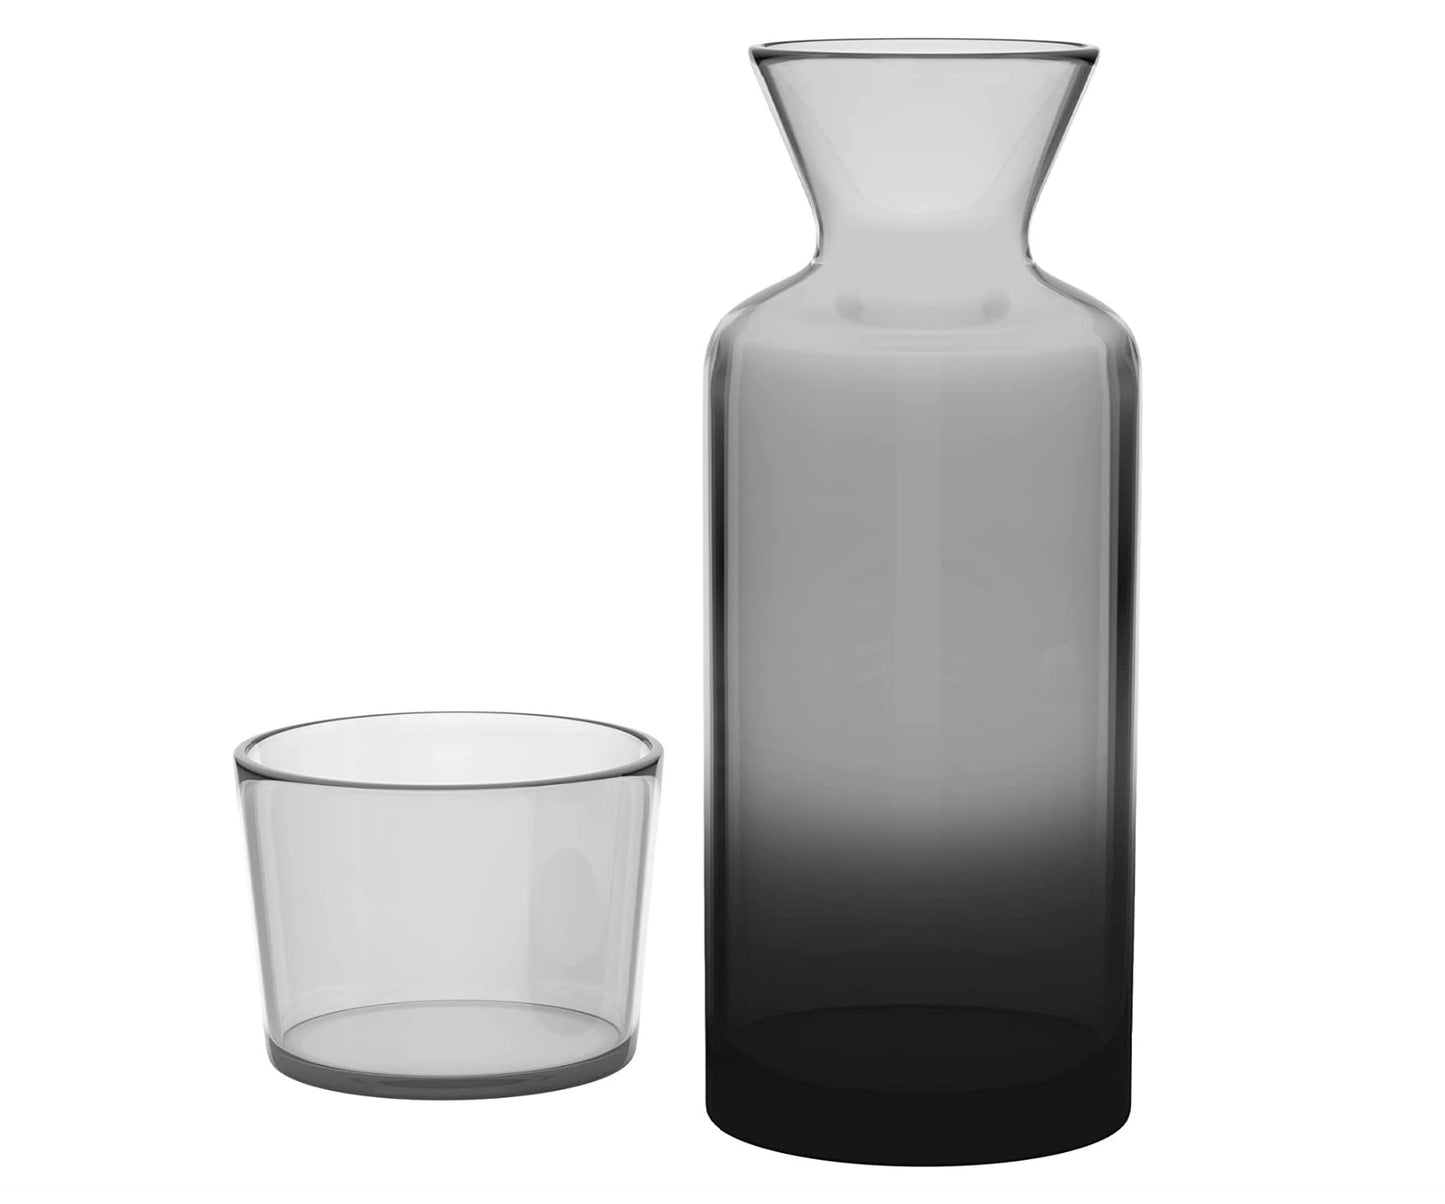 Smoked Ombre Water Carafe - $95.00